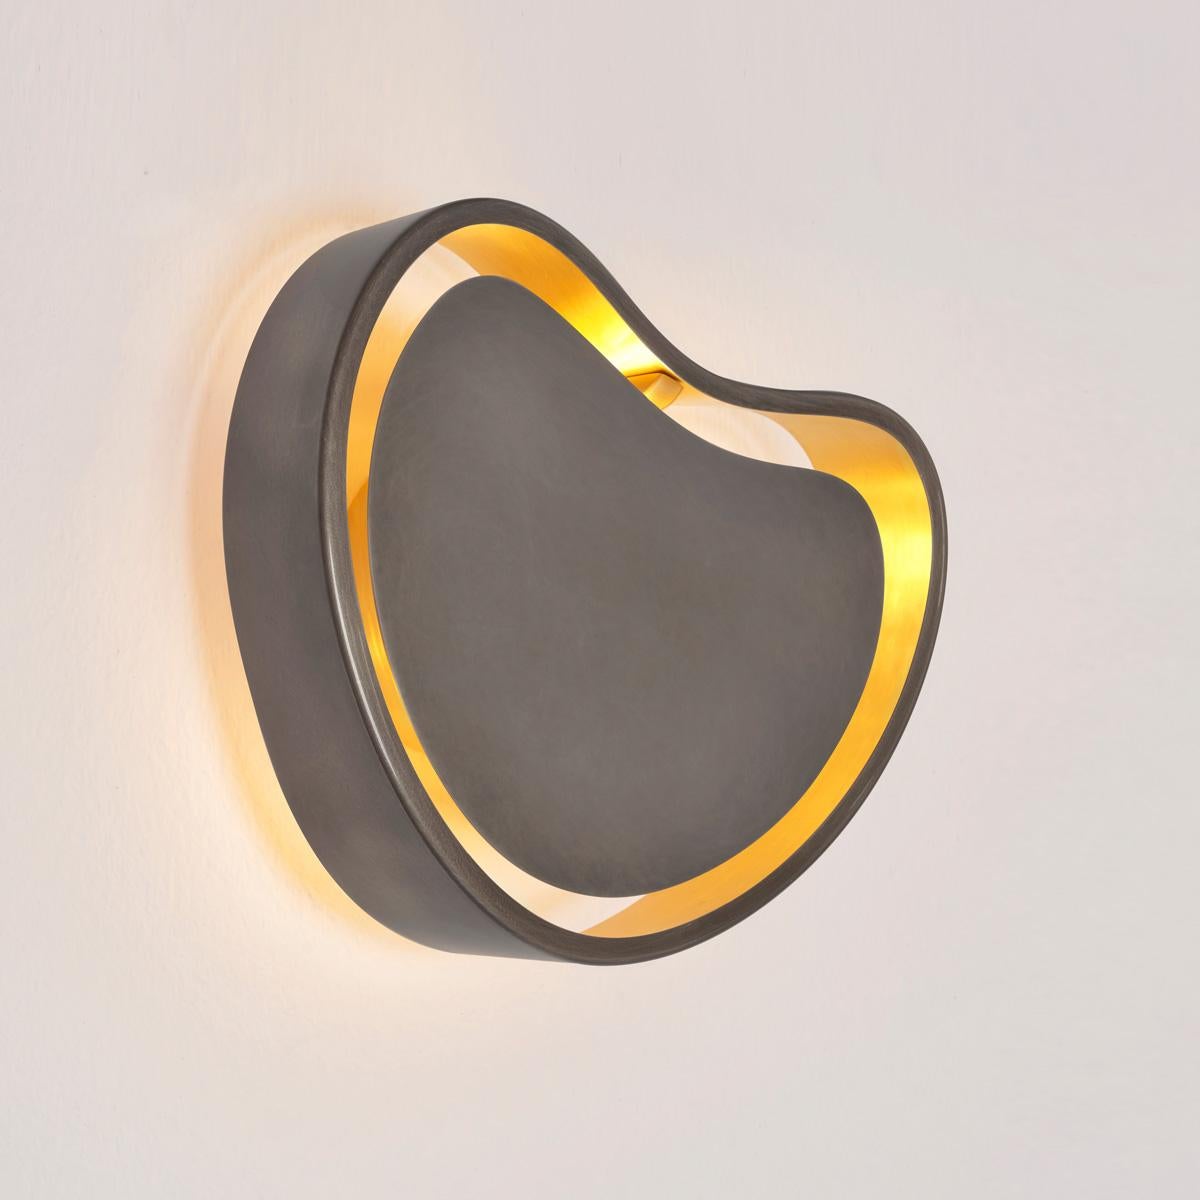 The Cuore collection was conceived with the goal of creating fixtures that are unexpected yet clean and harmoniously balanced. This is highlighted by the organically styled shades with multiple diffuser options: They can be brass with a backlit open